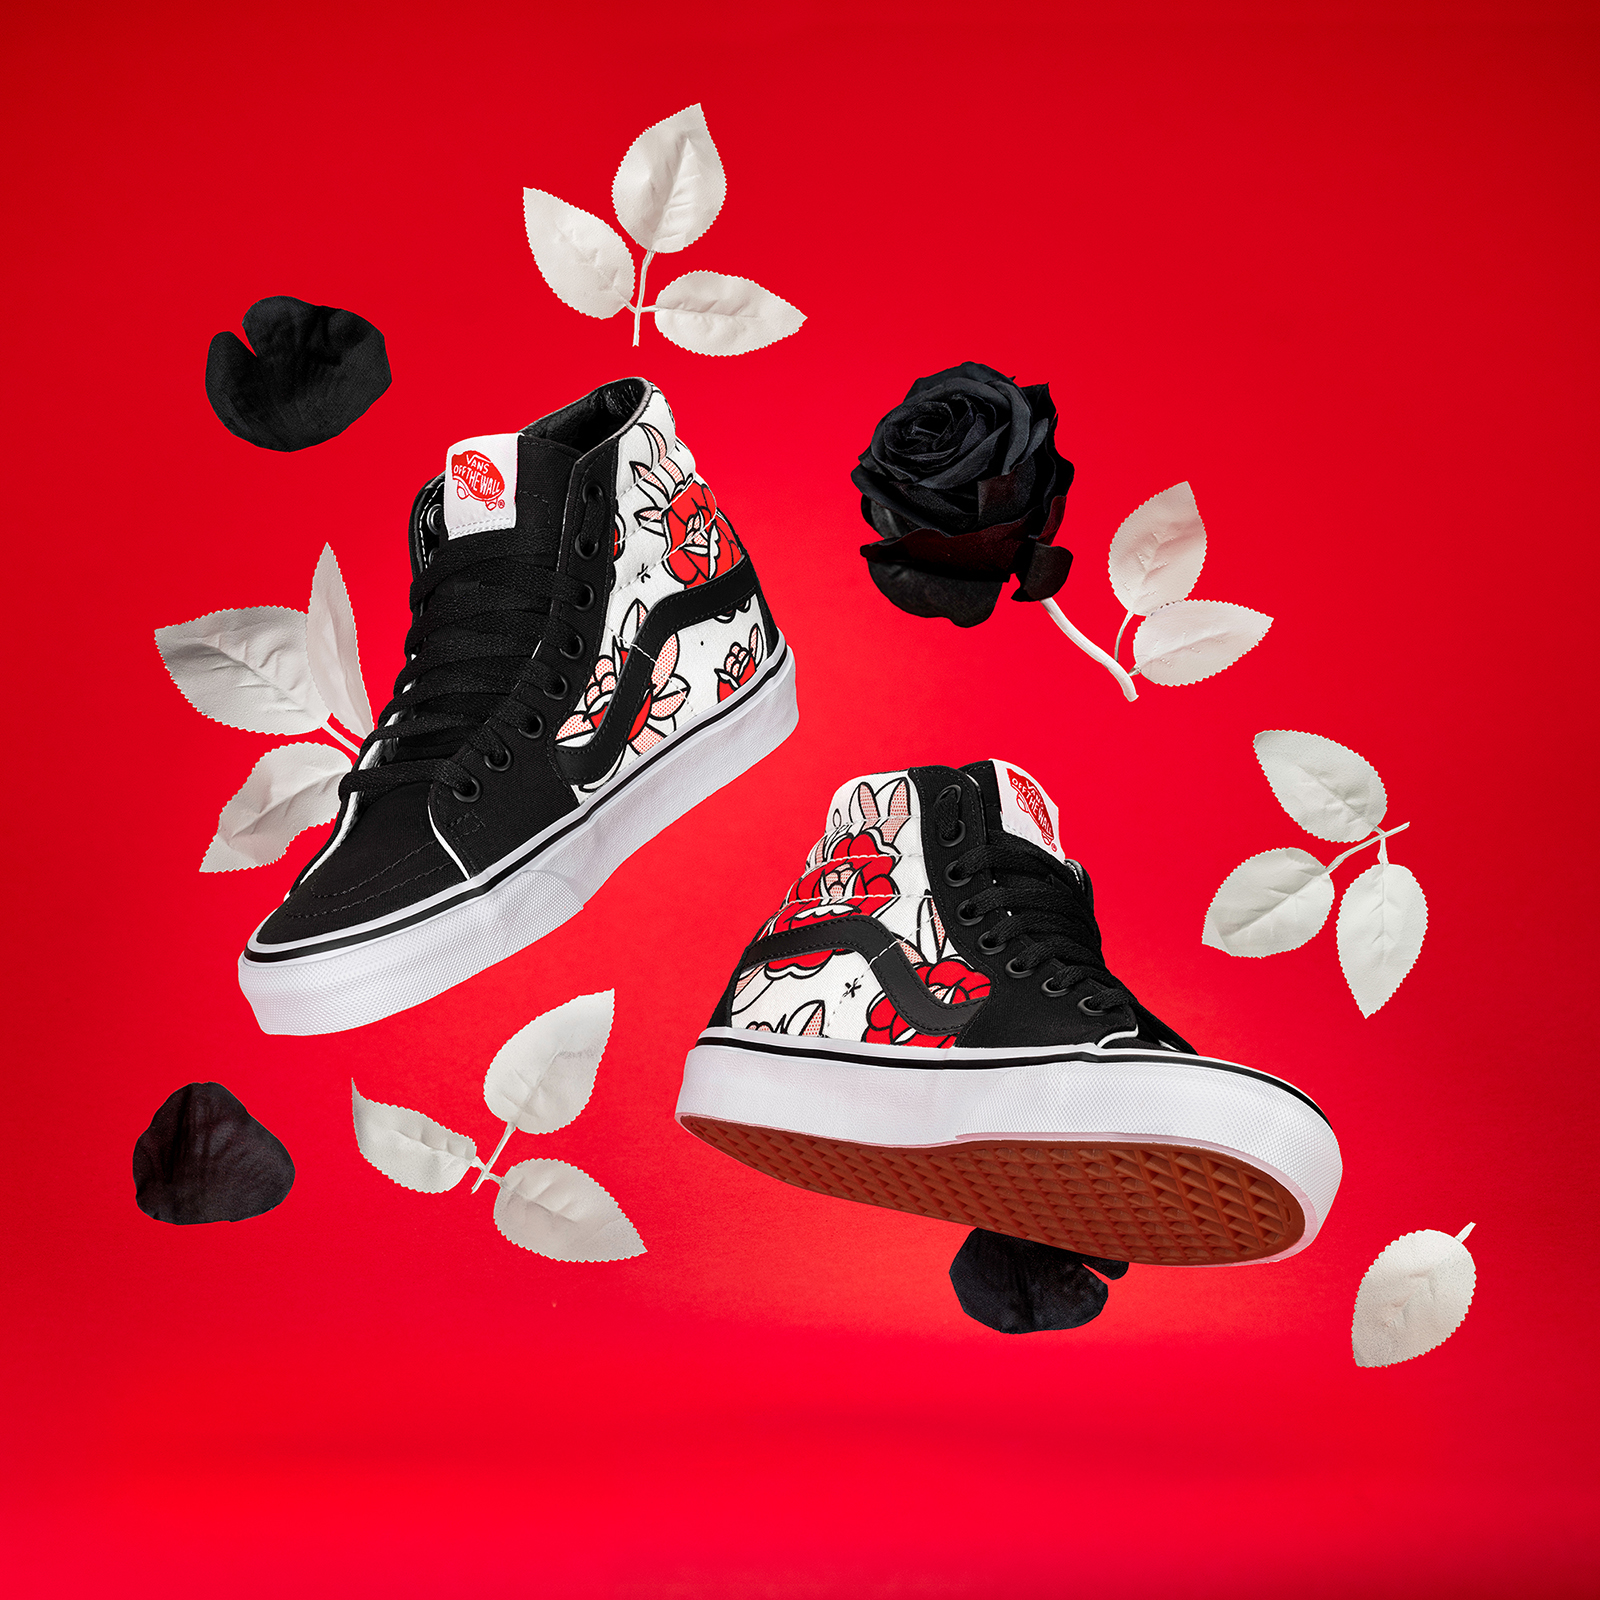 Custom Vans Sk8-Hi shoes featuring illustrations by Red Halftone floating surrounded by black and white flowers on a red background